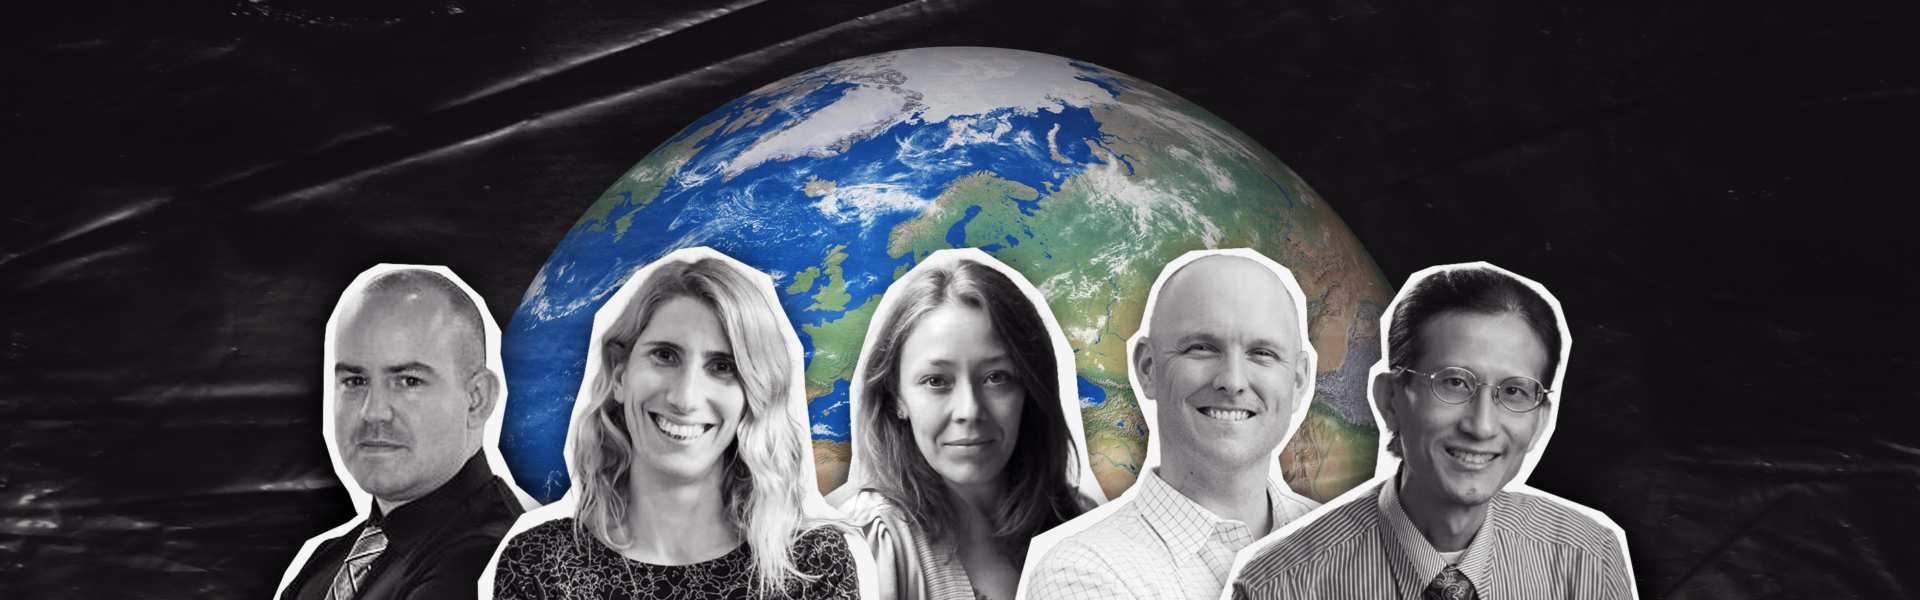 Five University of Guelph faculty members pose against stylized background of Earth against a black, plastic texture.